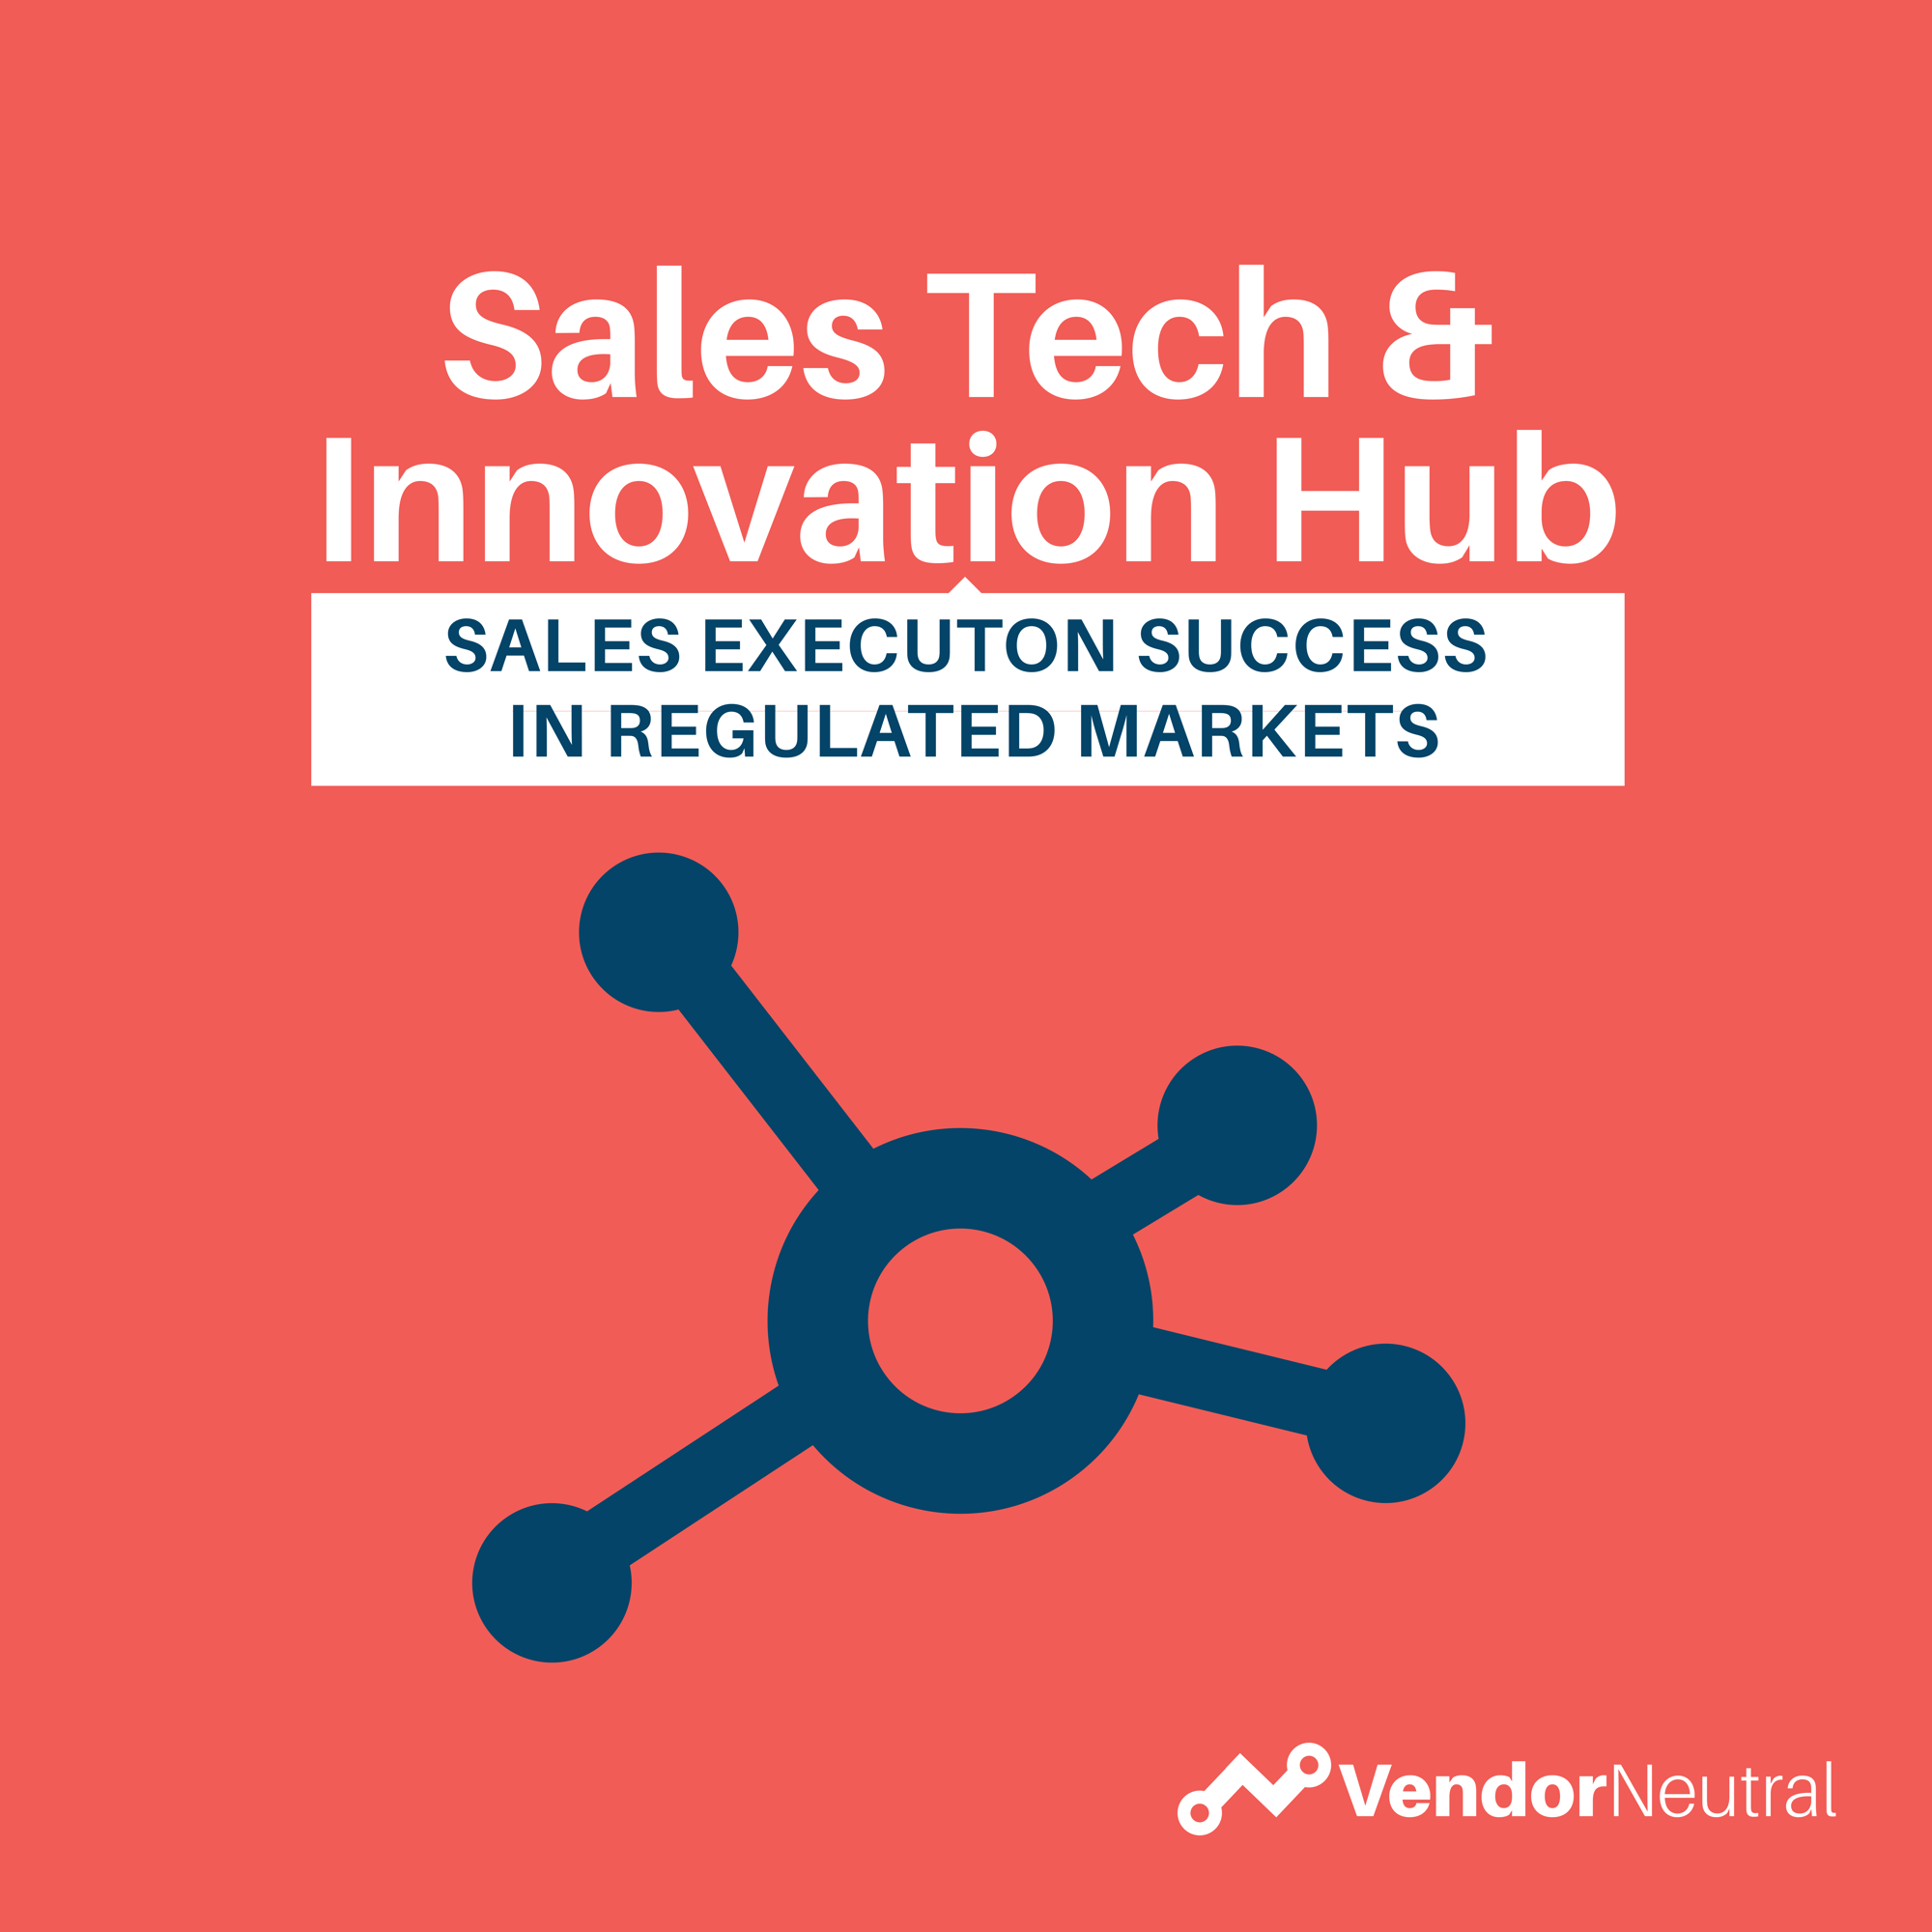 Sales Tech & Innovation Hub: Sales Execution Success in Regulated Markets